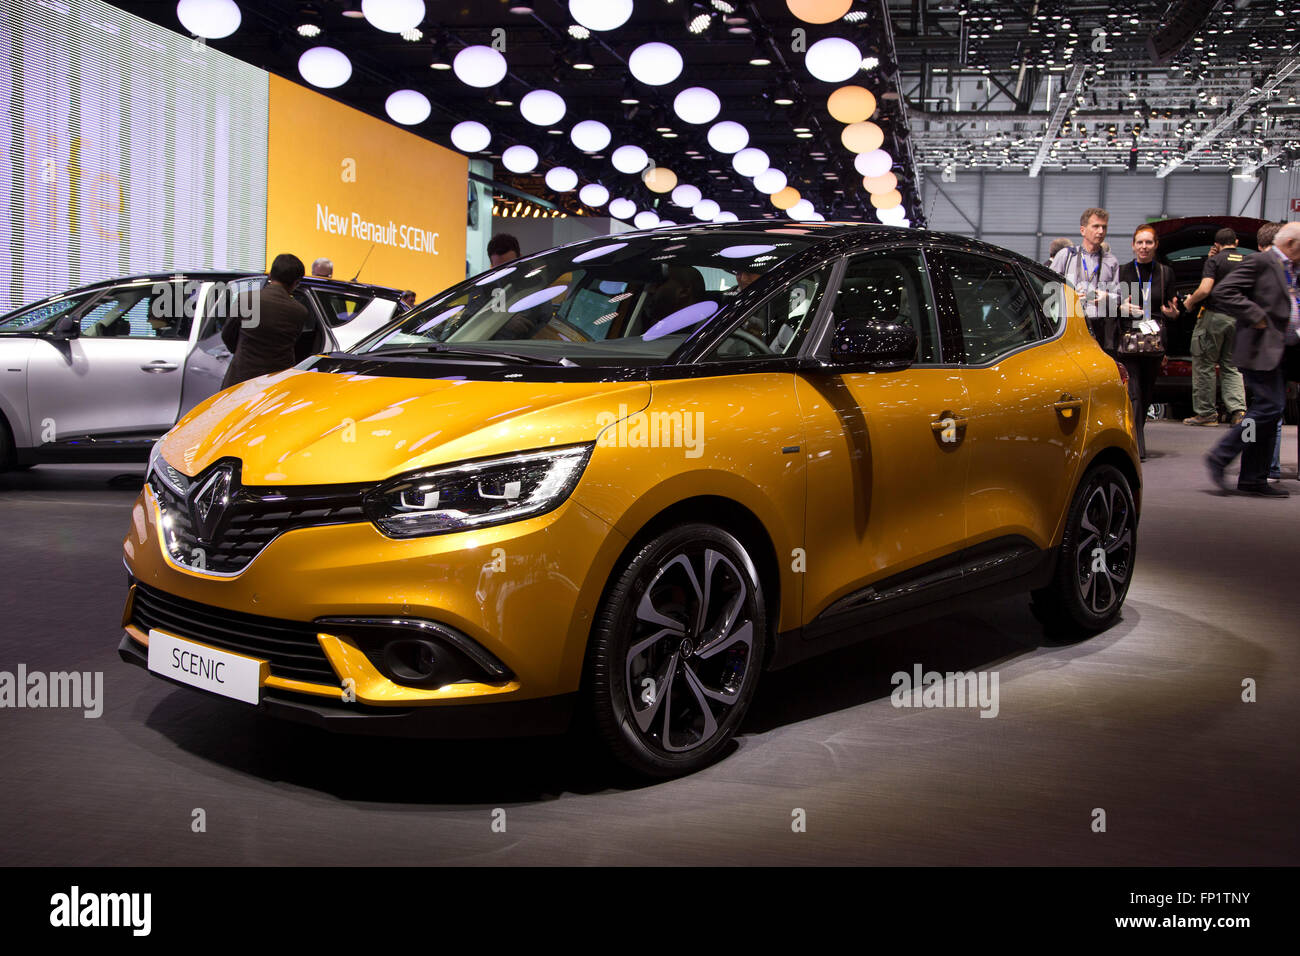 Renault scenic stock photography and images - Alamy